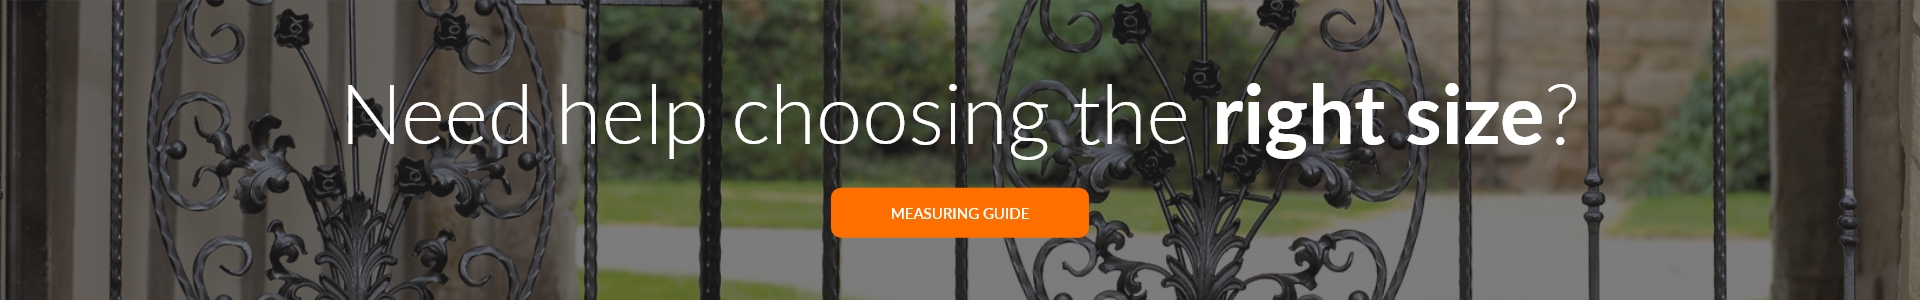 View the measuring guide here if you need help with ordering sizes